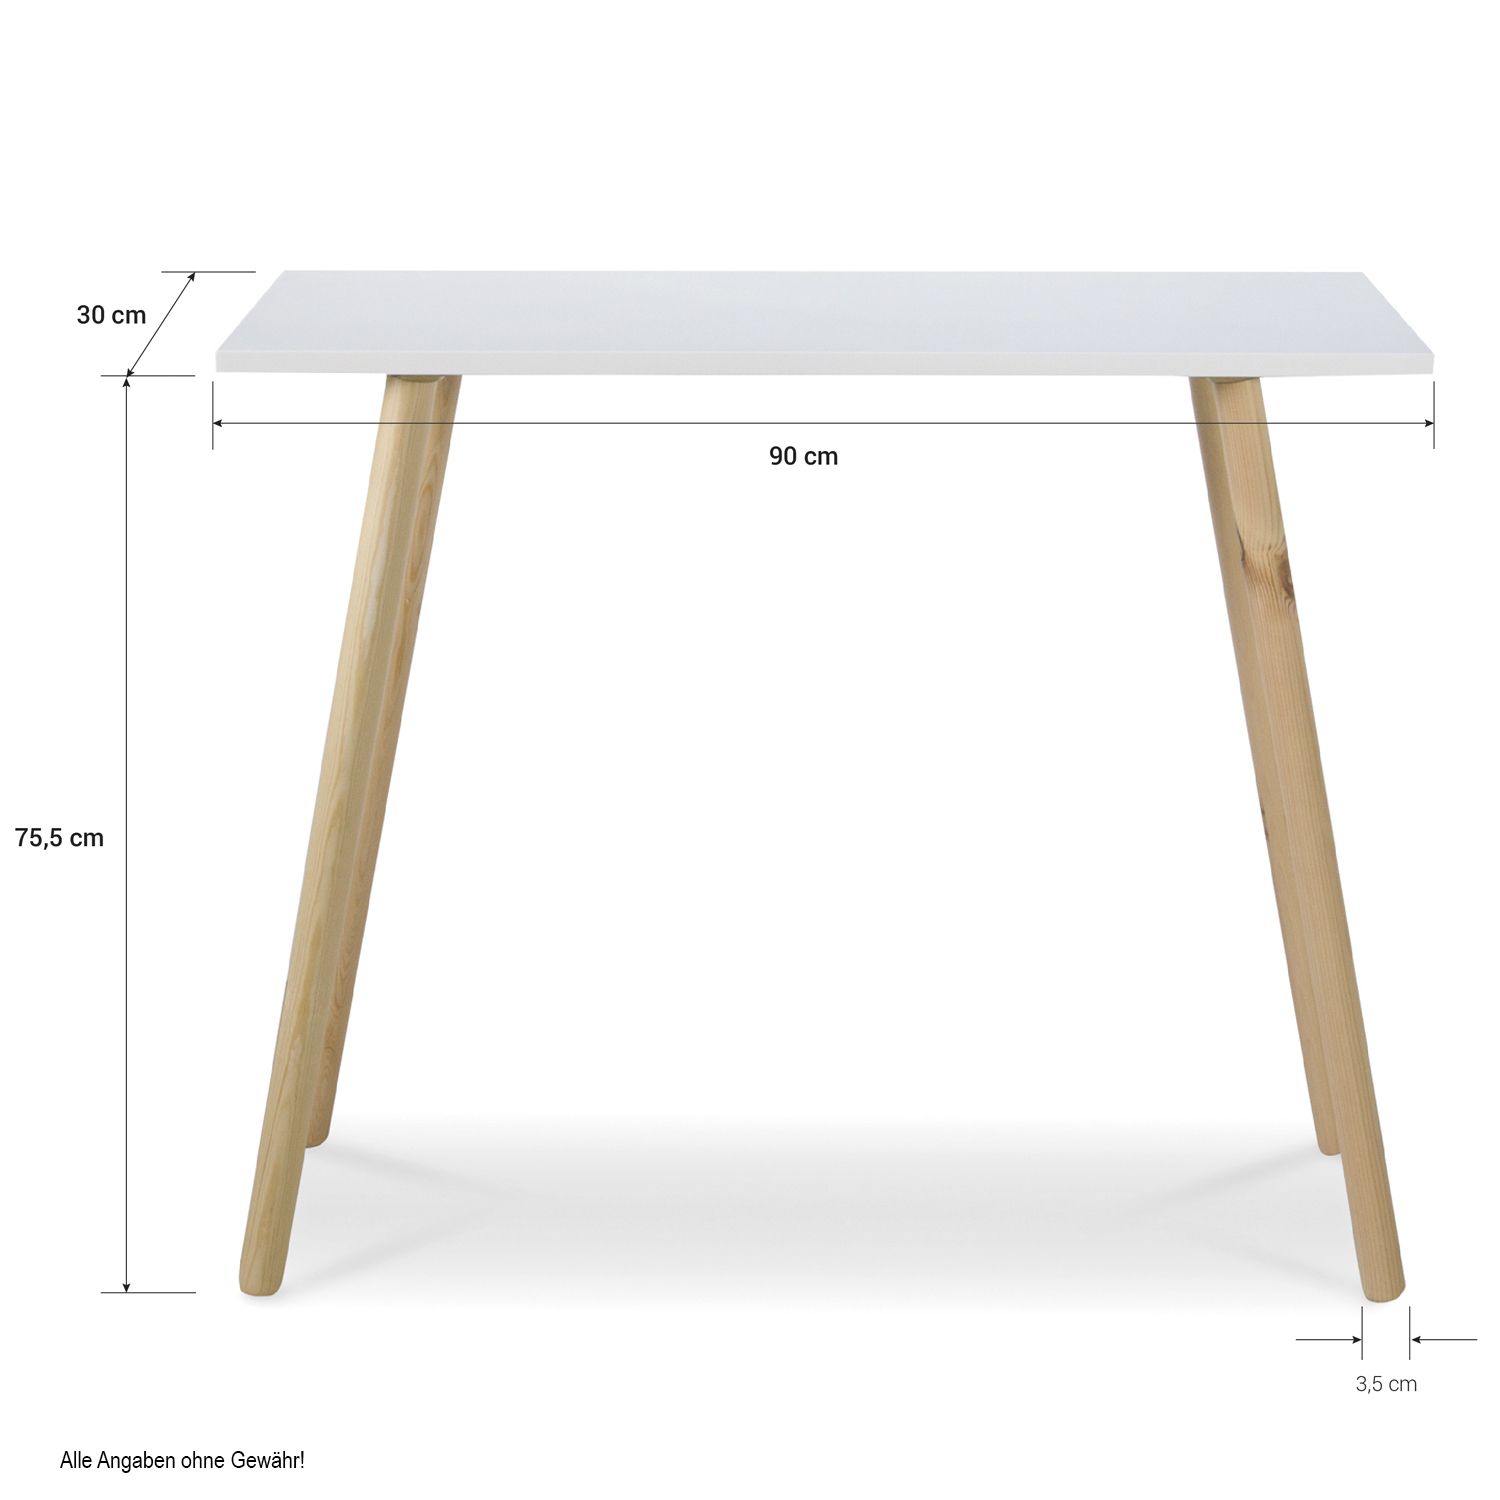 Console Table White Console Writing Desk Wall Console